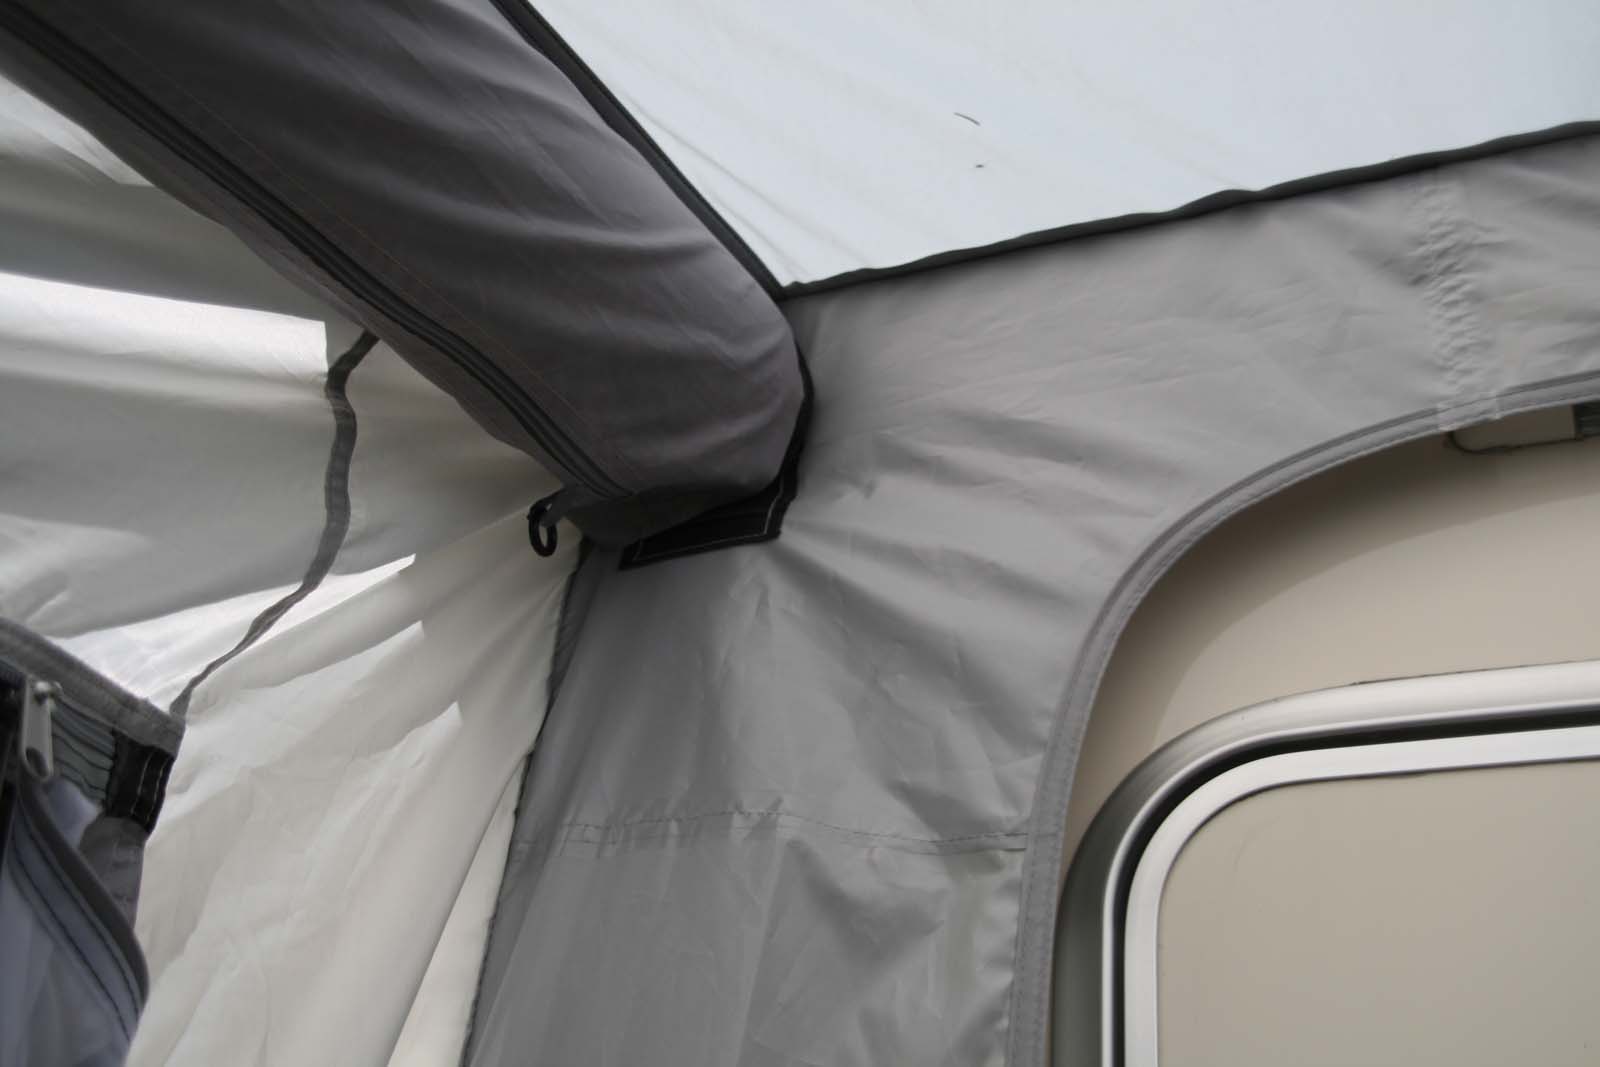 Drive away several style camping awning